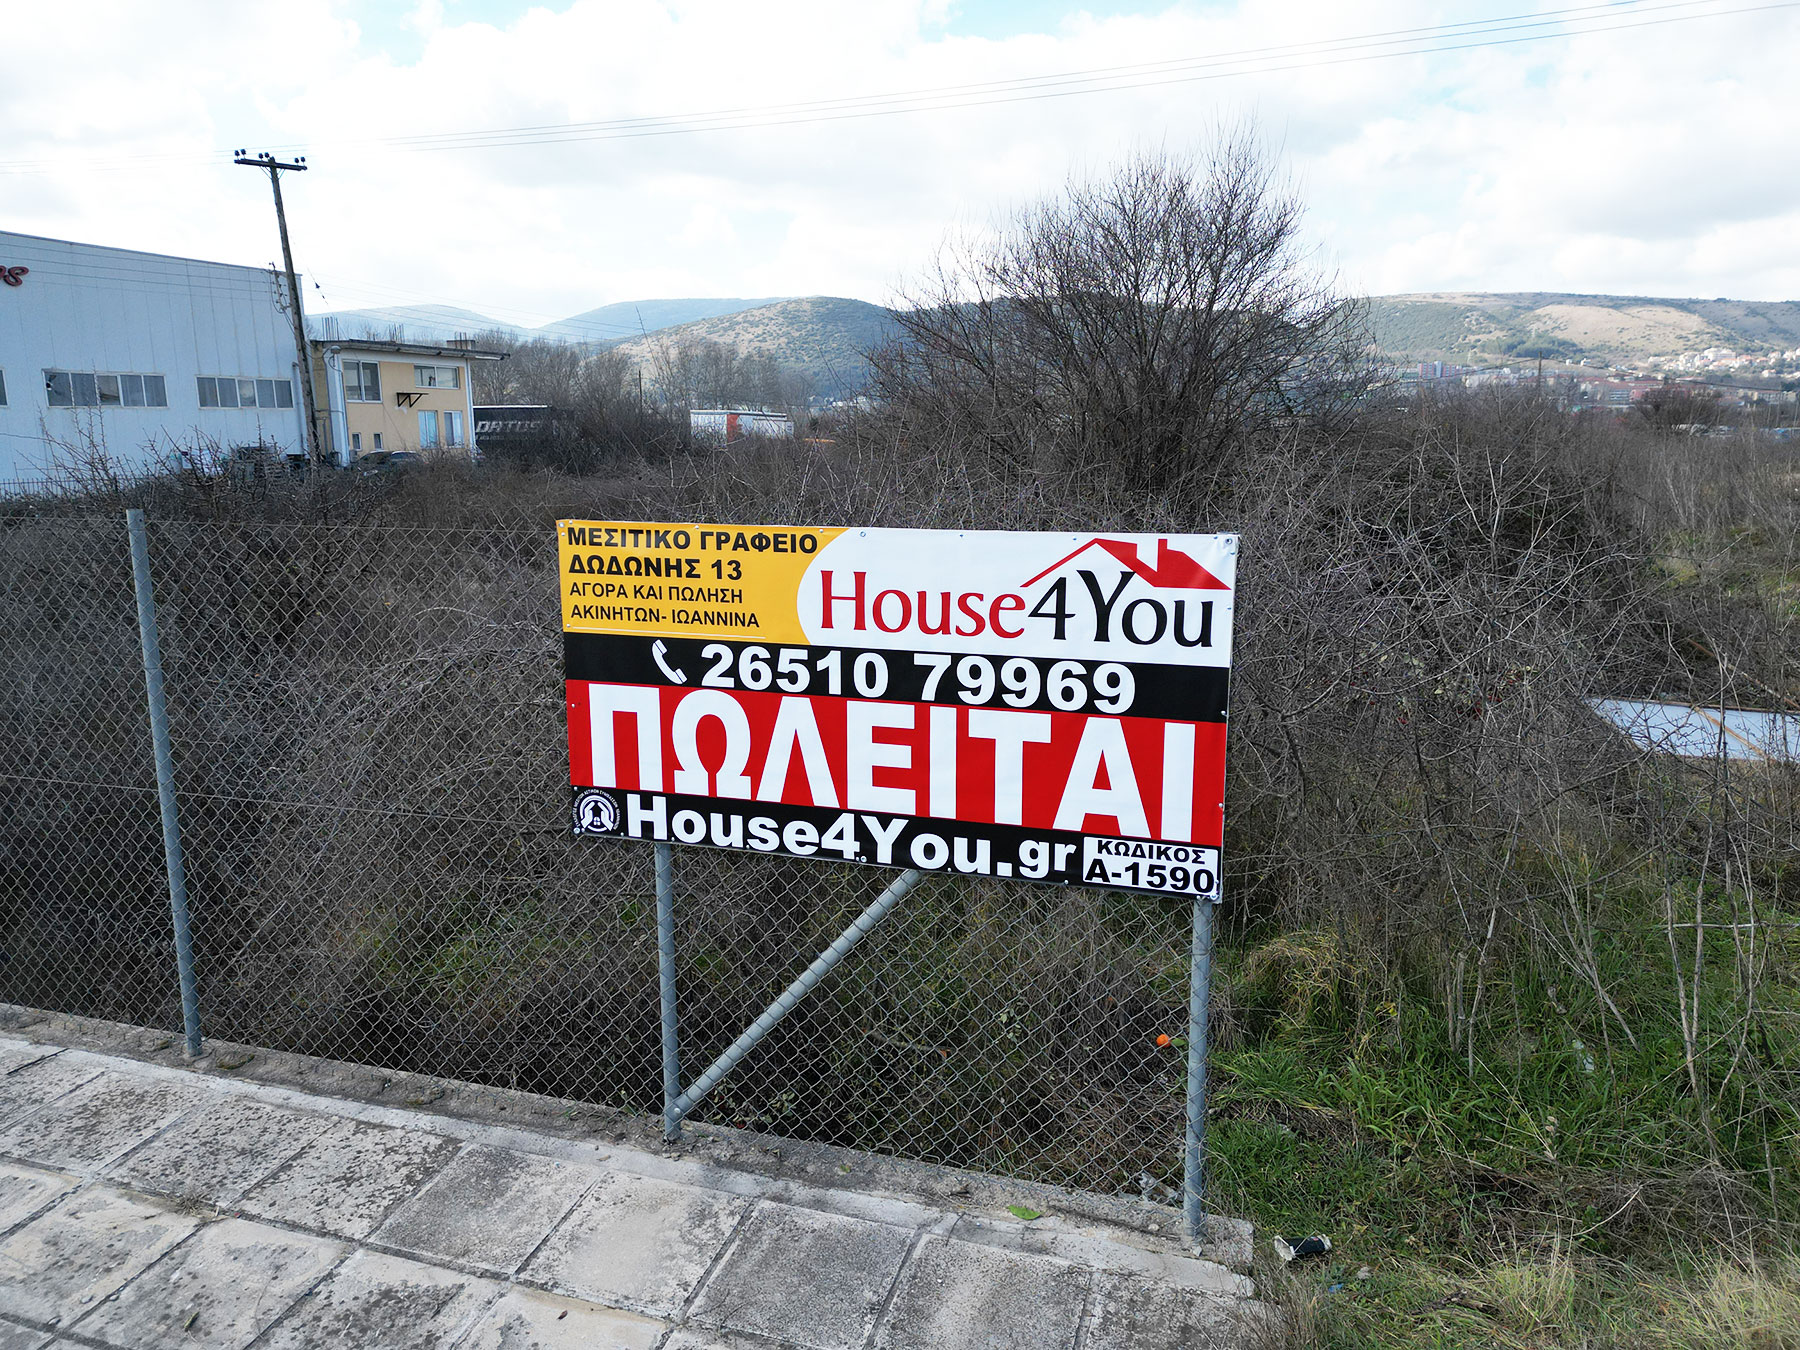 Plot of land 4,550 sq.m. for sale. at the 5th km of the Ioannina - Athens highway